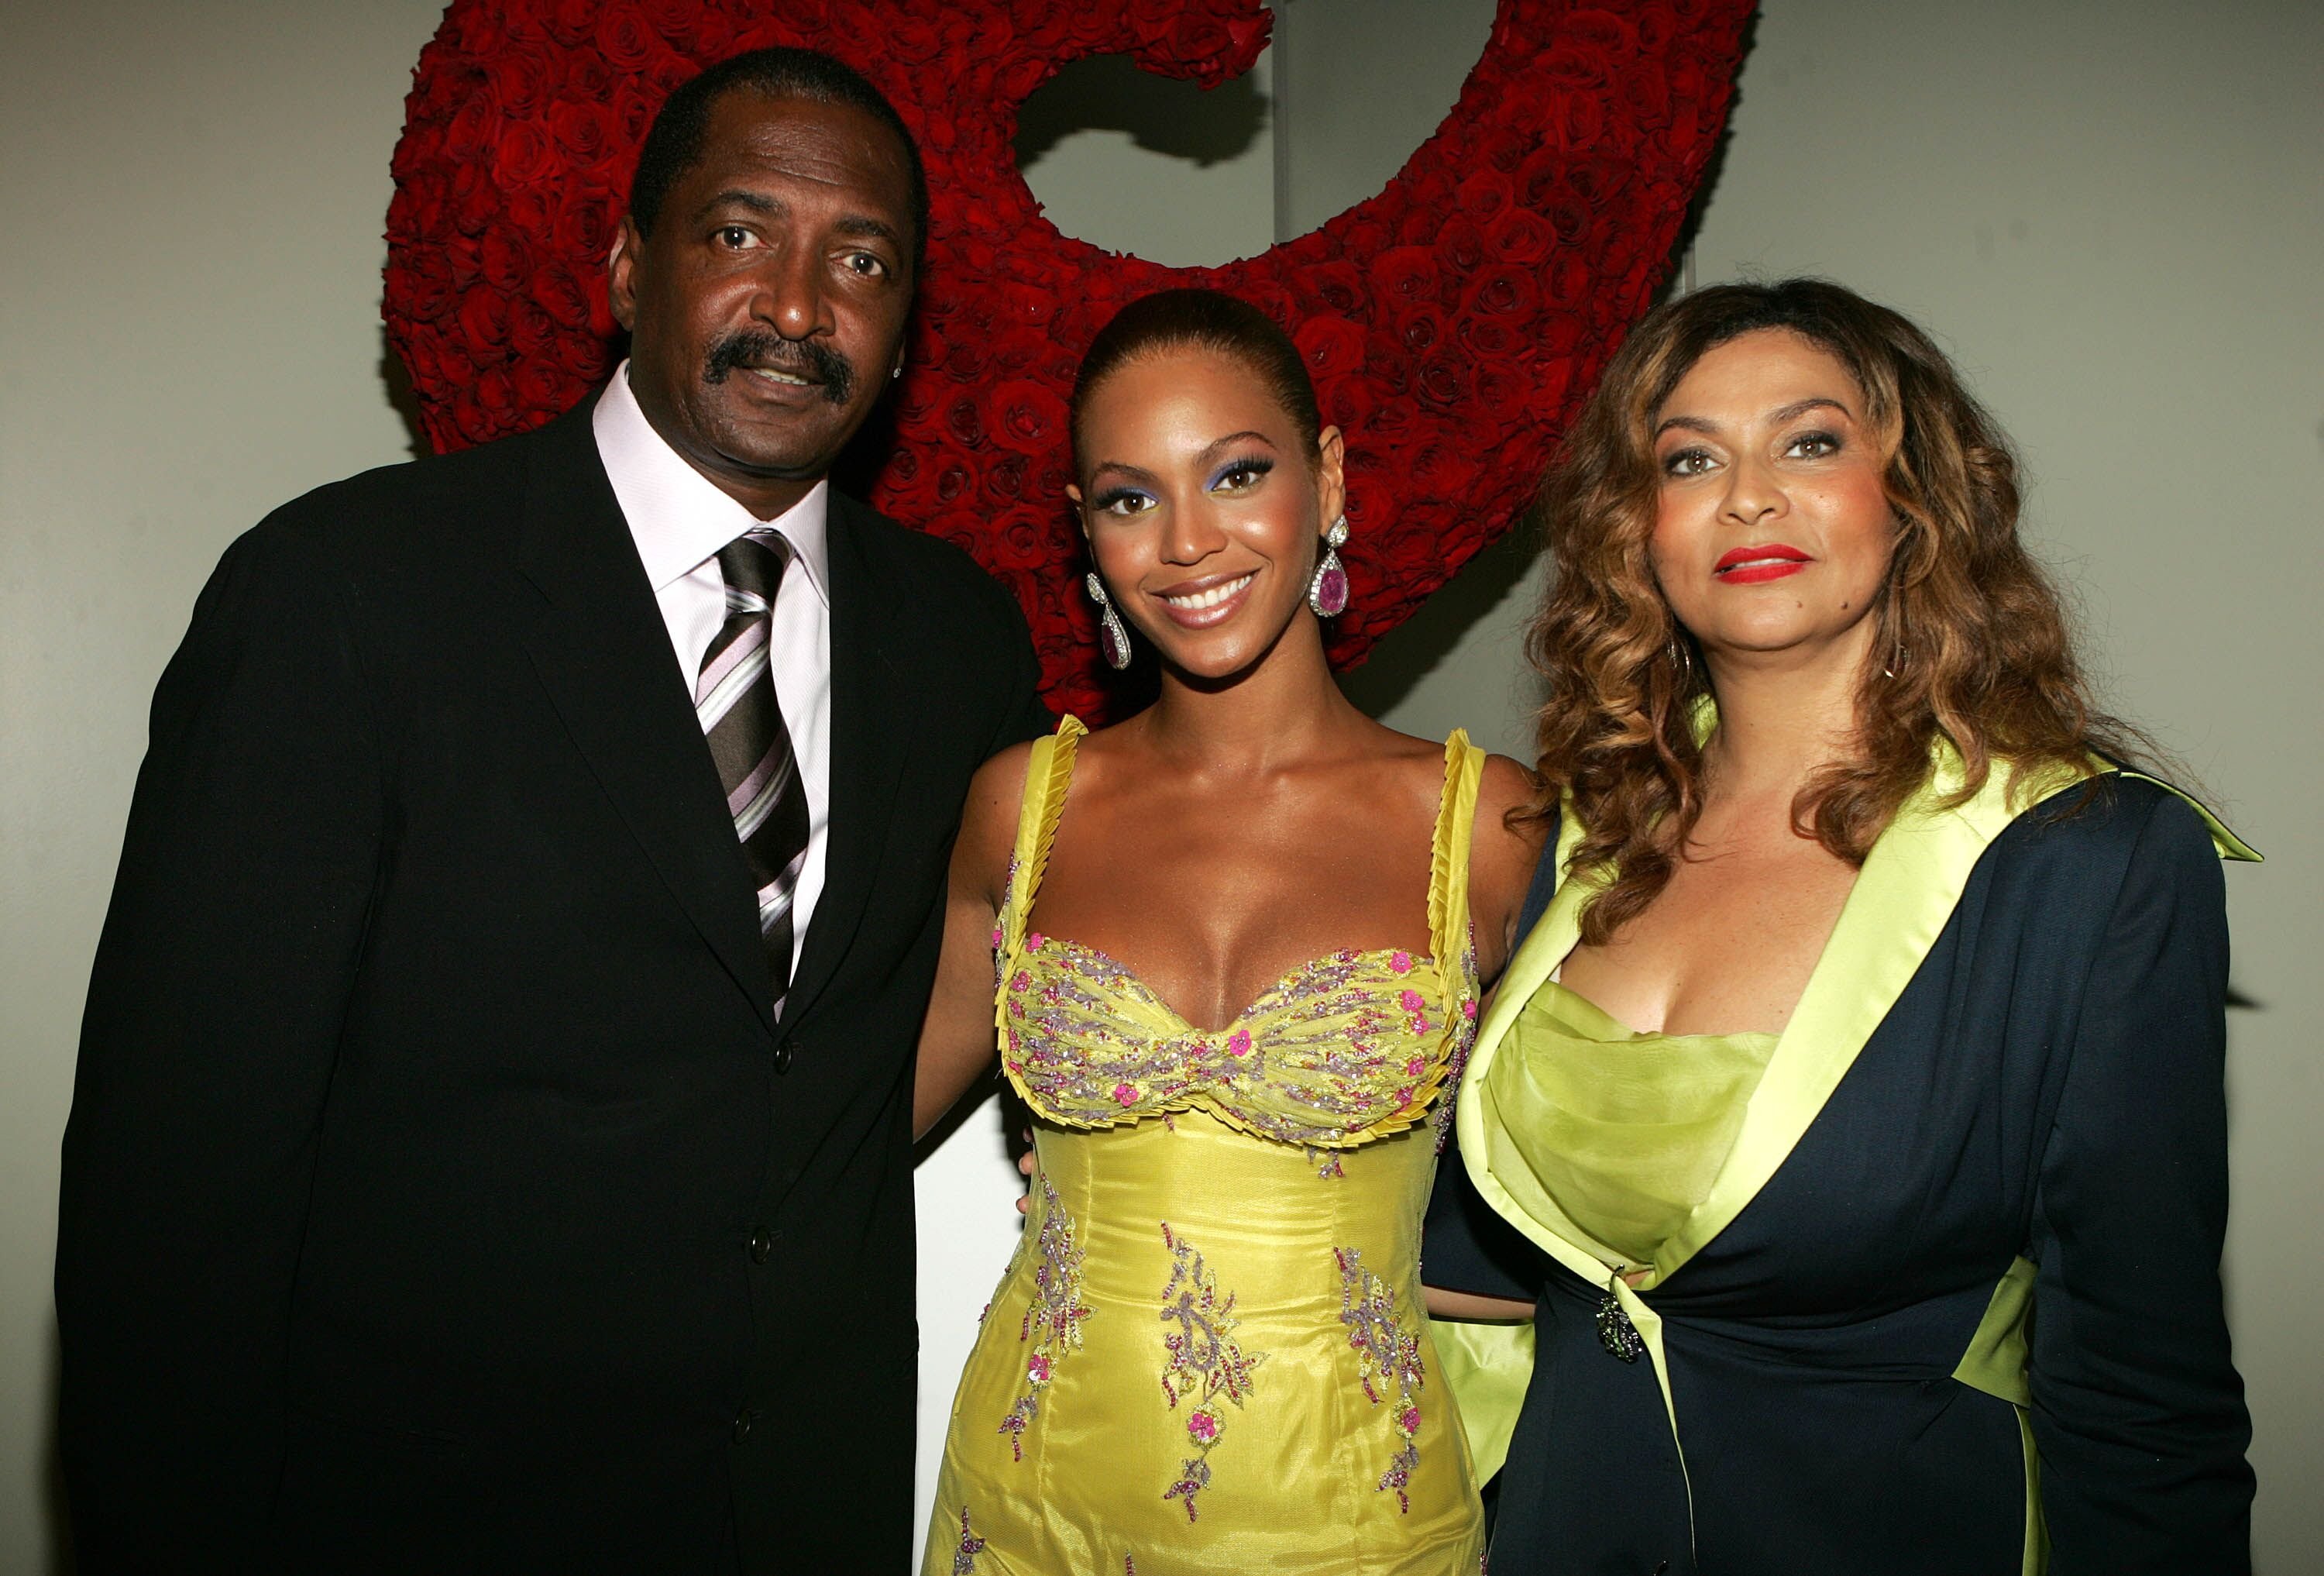 Mathew Knowles, Beyonce, and Tina Knowles-Lawson at a formal event | Source: Getty Images/GlobalImagesUkraine